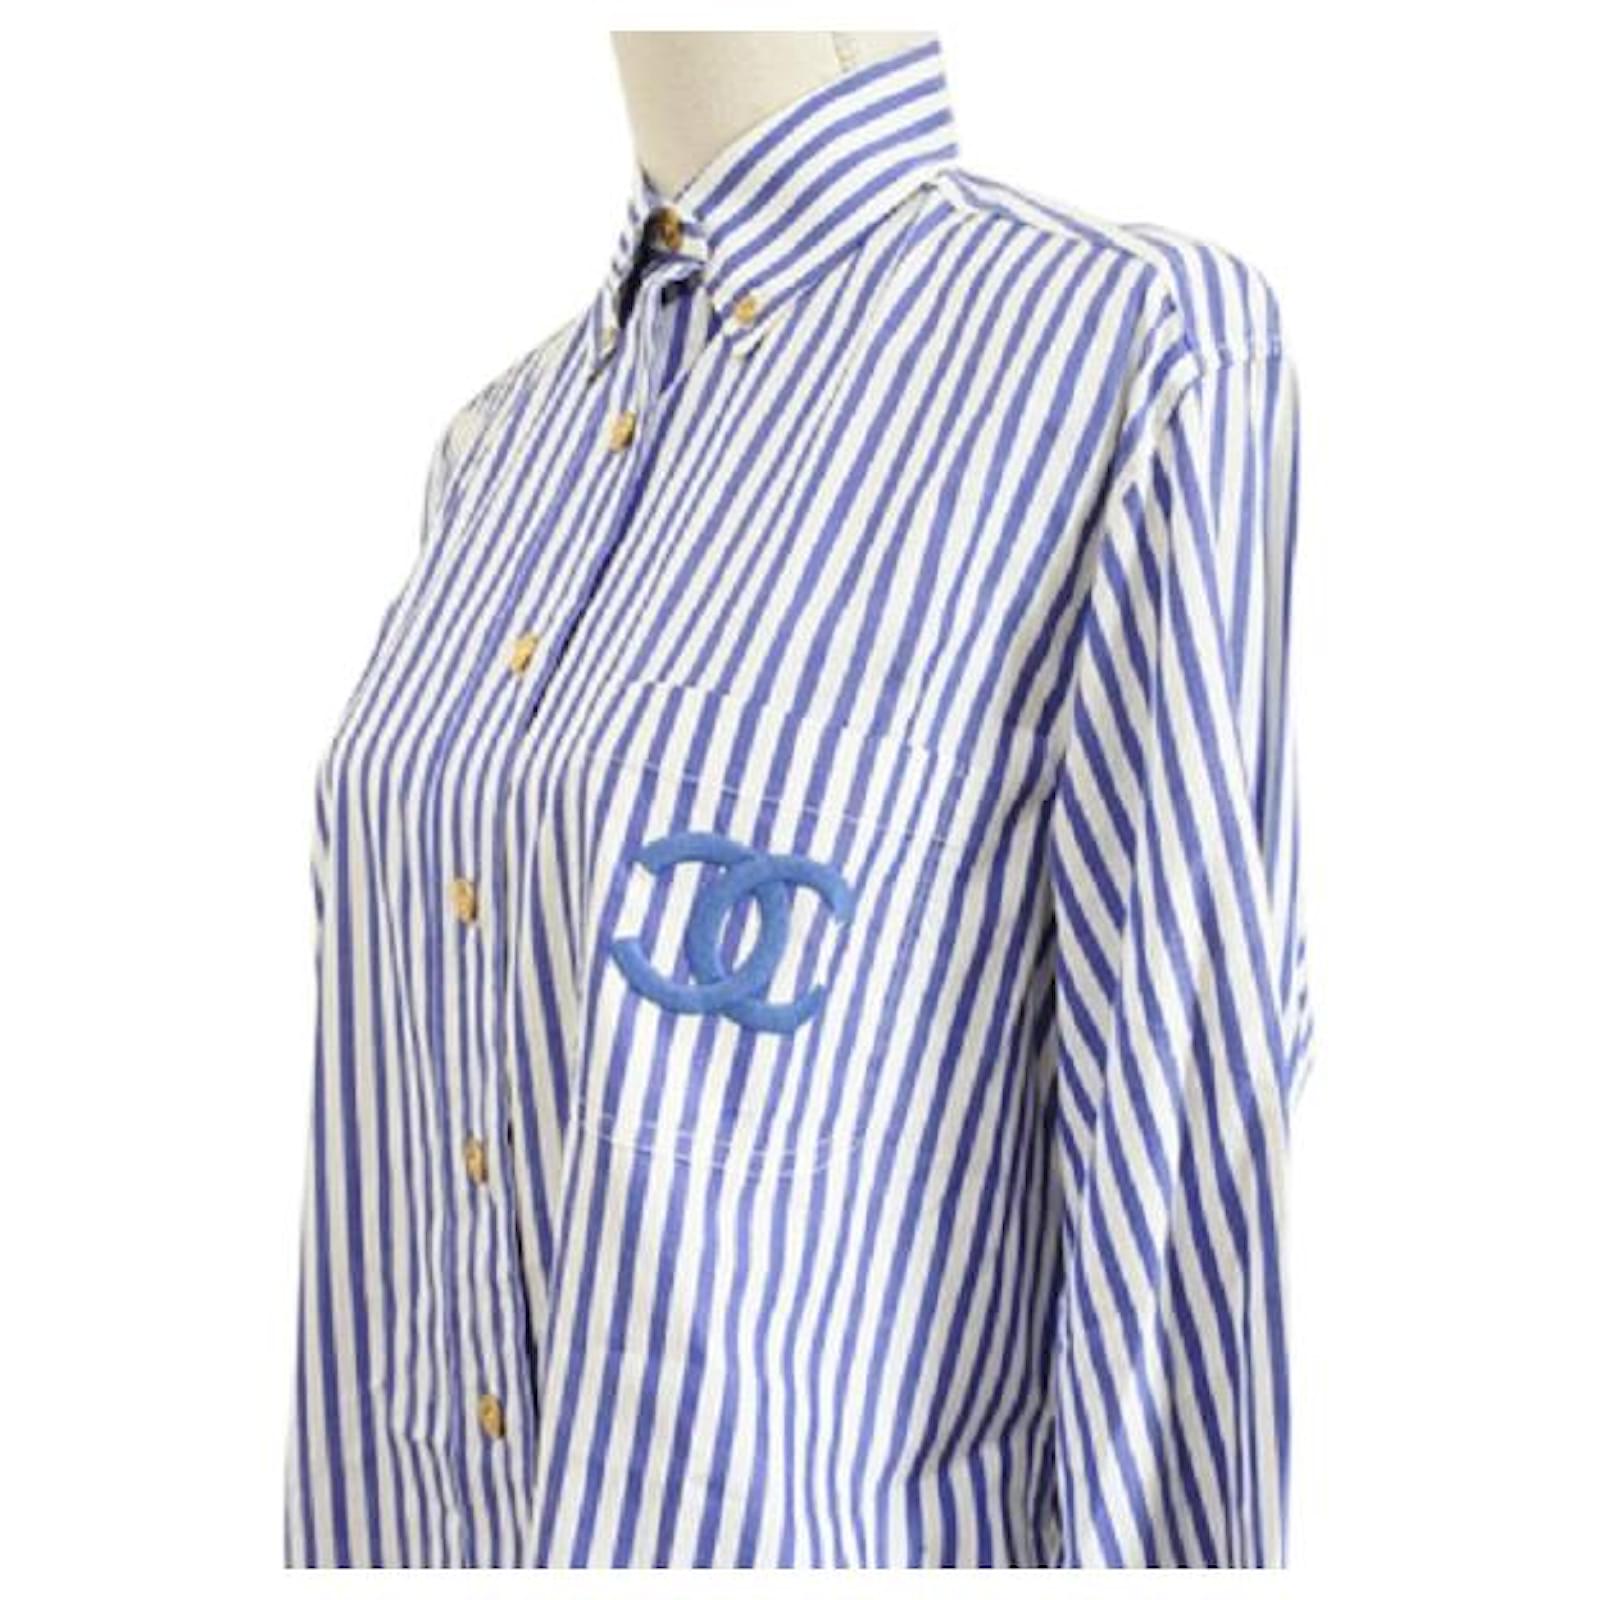 *[Used] Chanel Striped Shirt Pocket Coco Mark White x Blue Gold